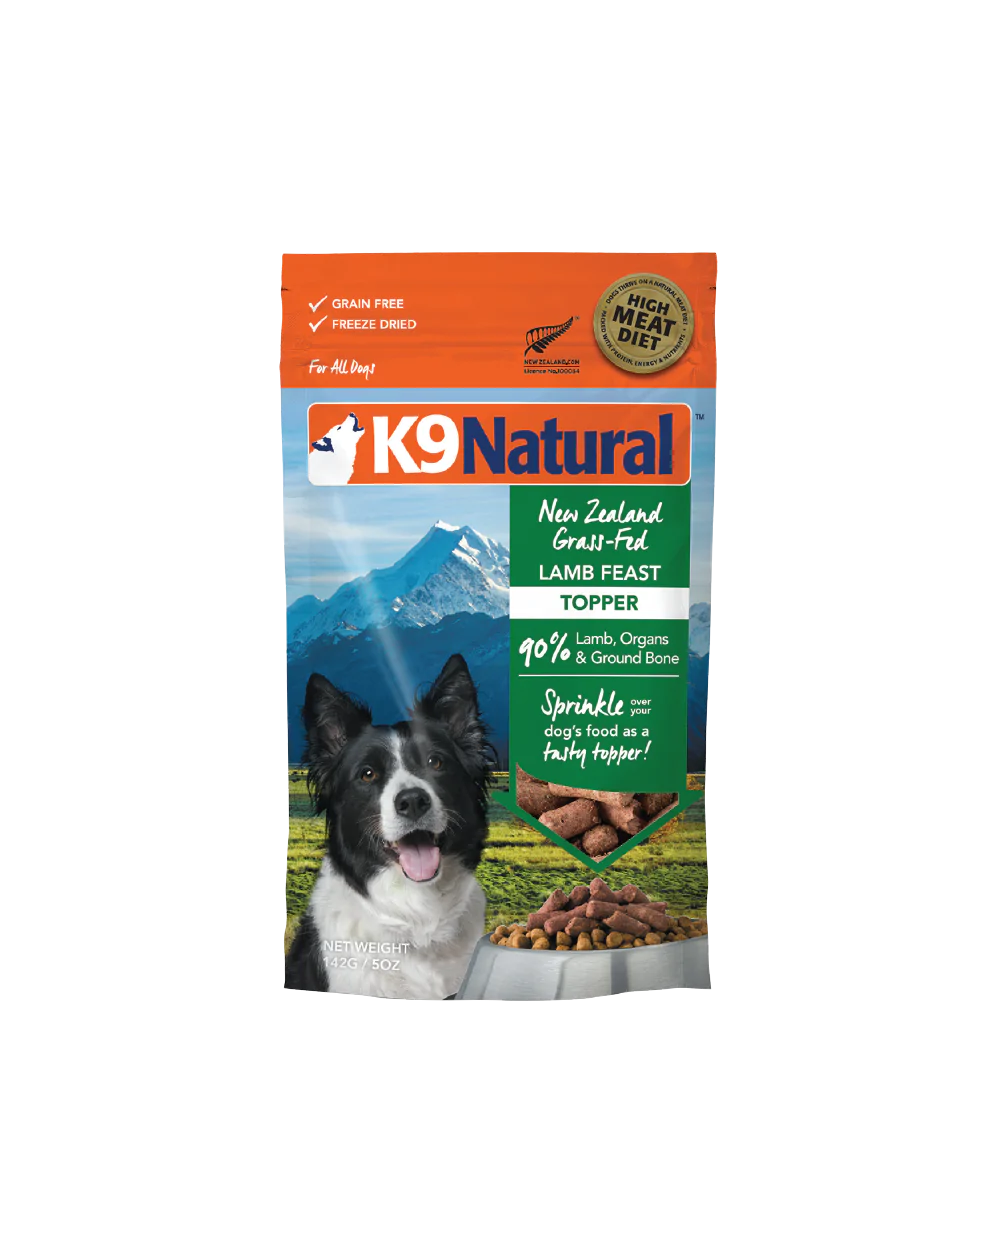 K9 Natural Lamb Feast 5-oz, Freeze-Dried Meal Topper